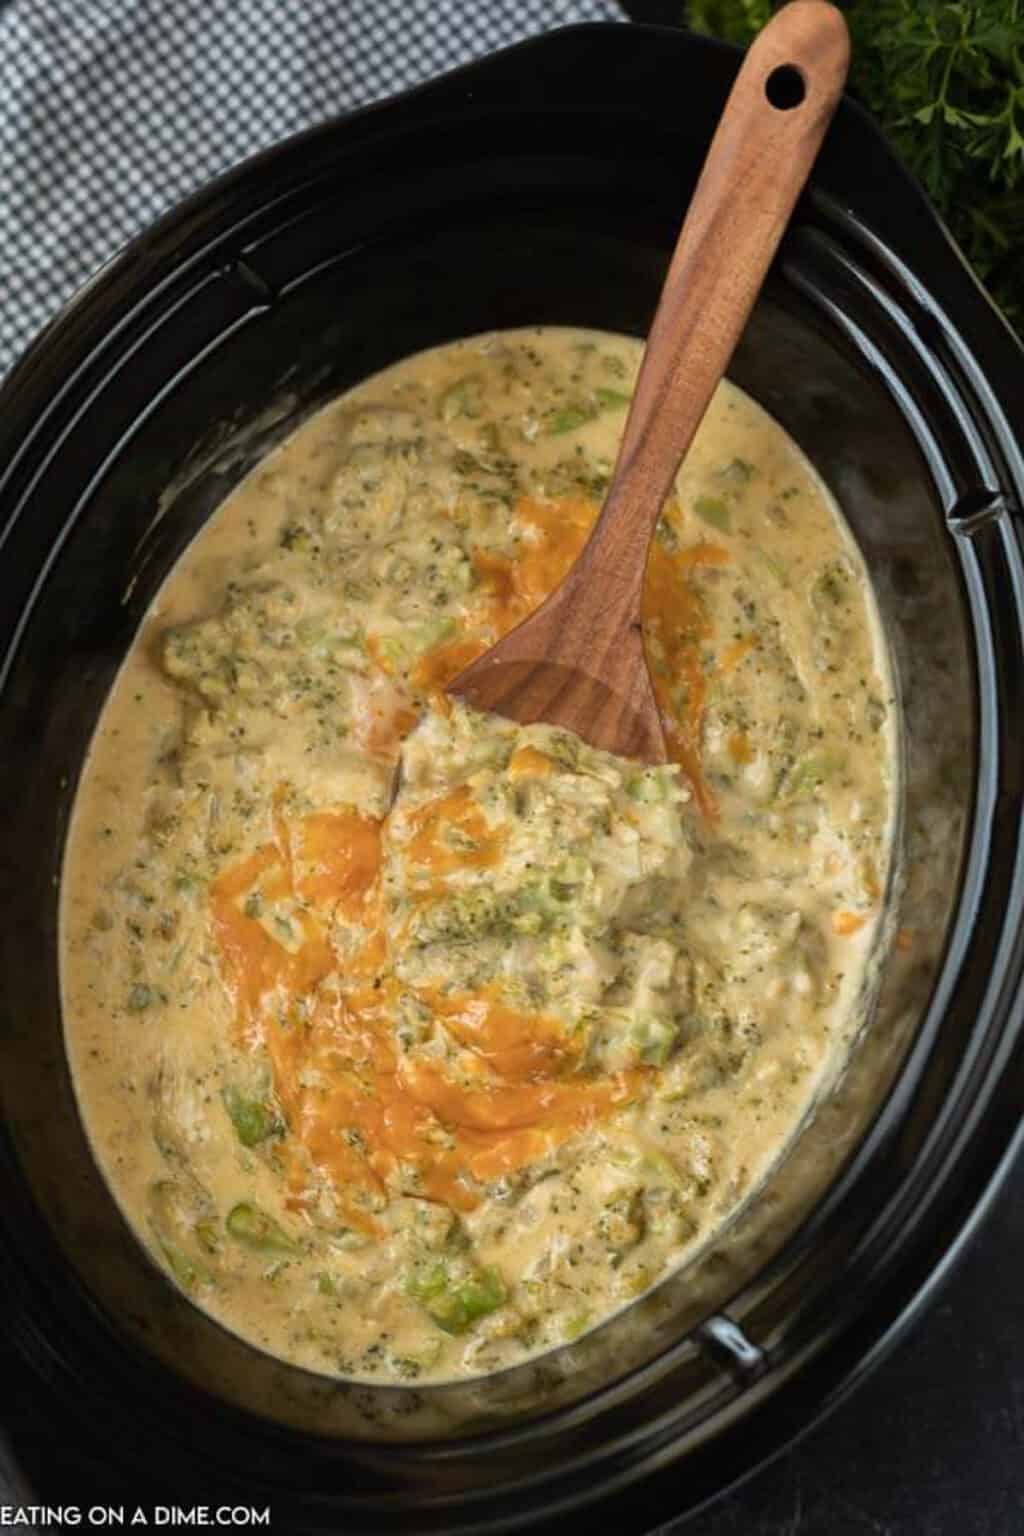 Crockpot broccoli cheese soup (& VIDEO!) - Broccoli and Cheese Soup